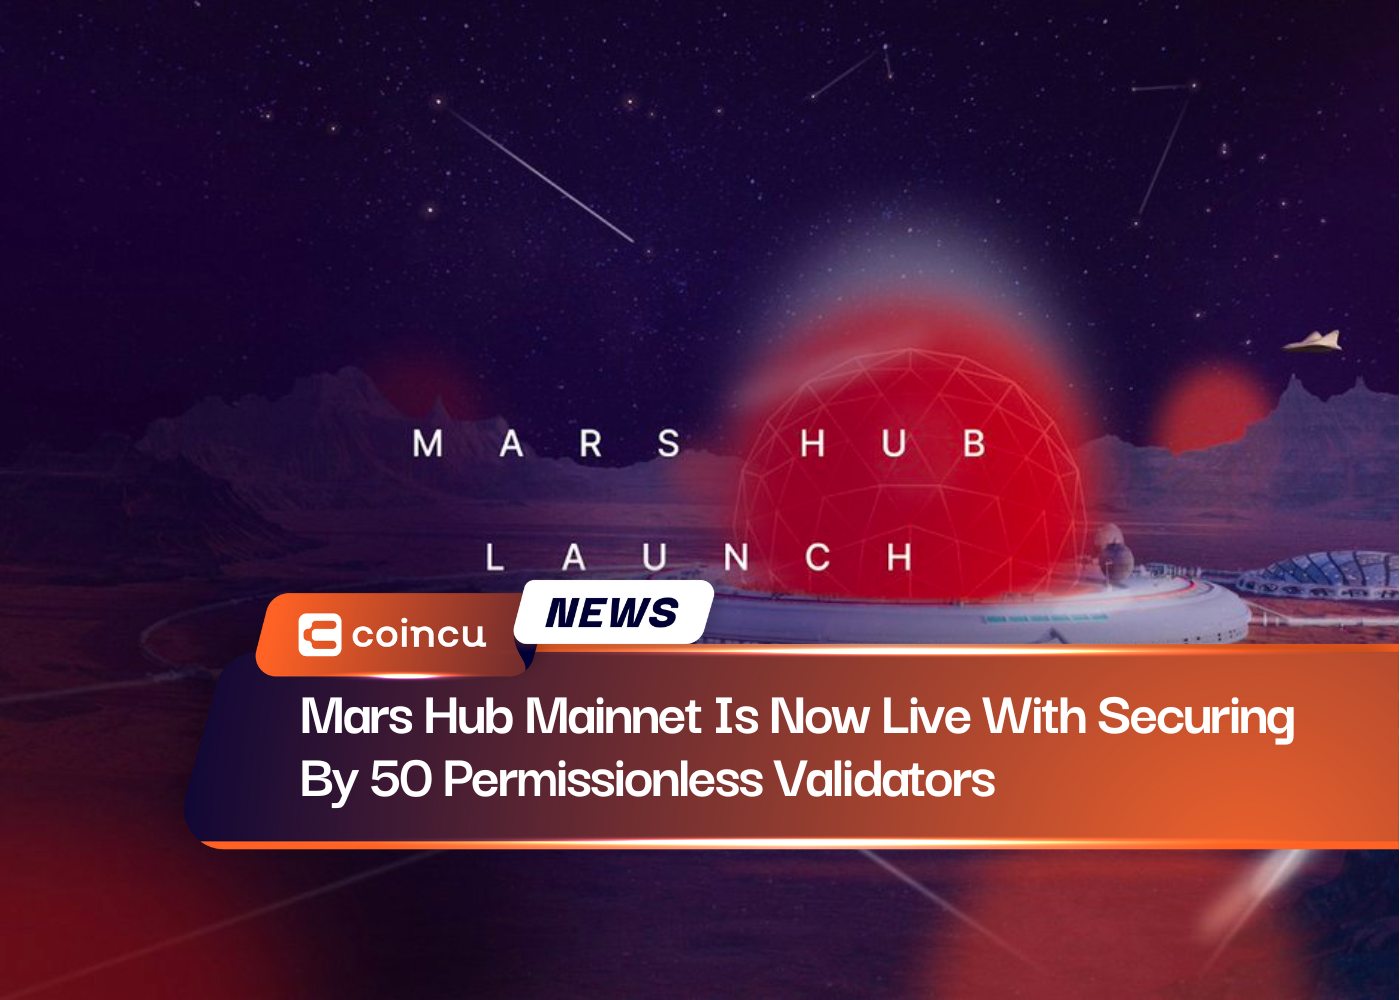 Mars Hub Mainnet Is Now Live With Securing By 50 Permissionless Validators